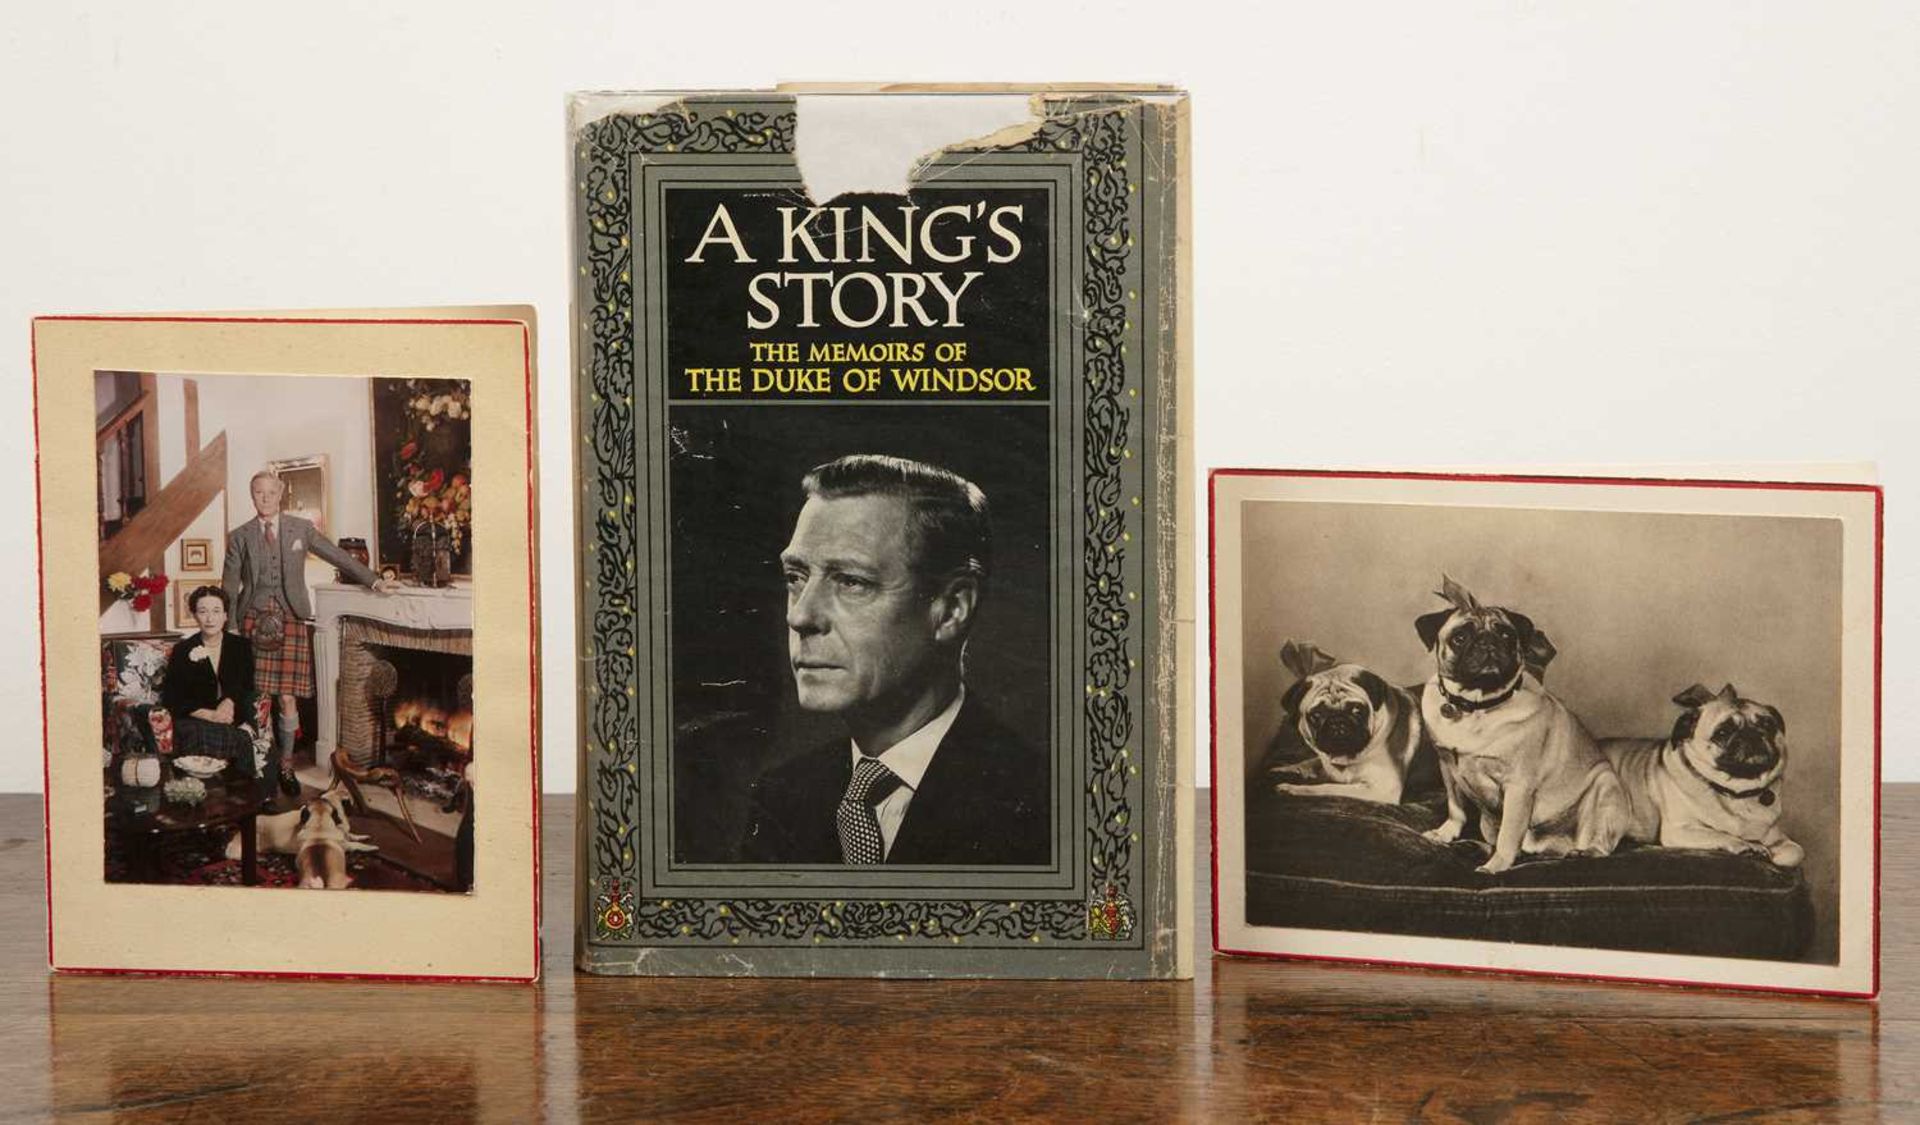 'A King's Story: The Memoirs of the Duke of Windsor' (Book) published by Thomas Allen 1951,